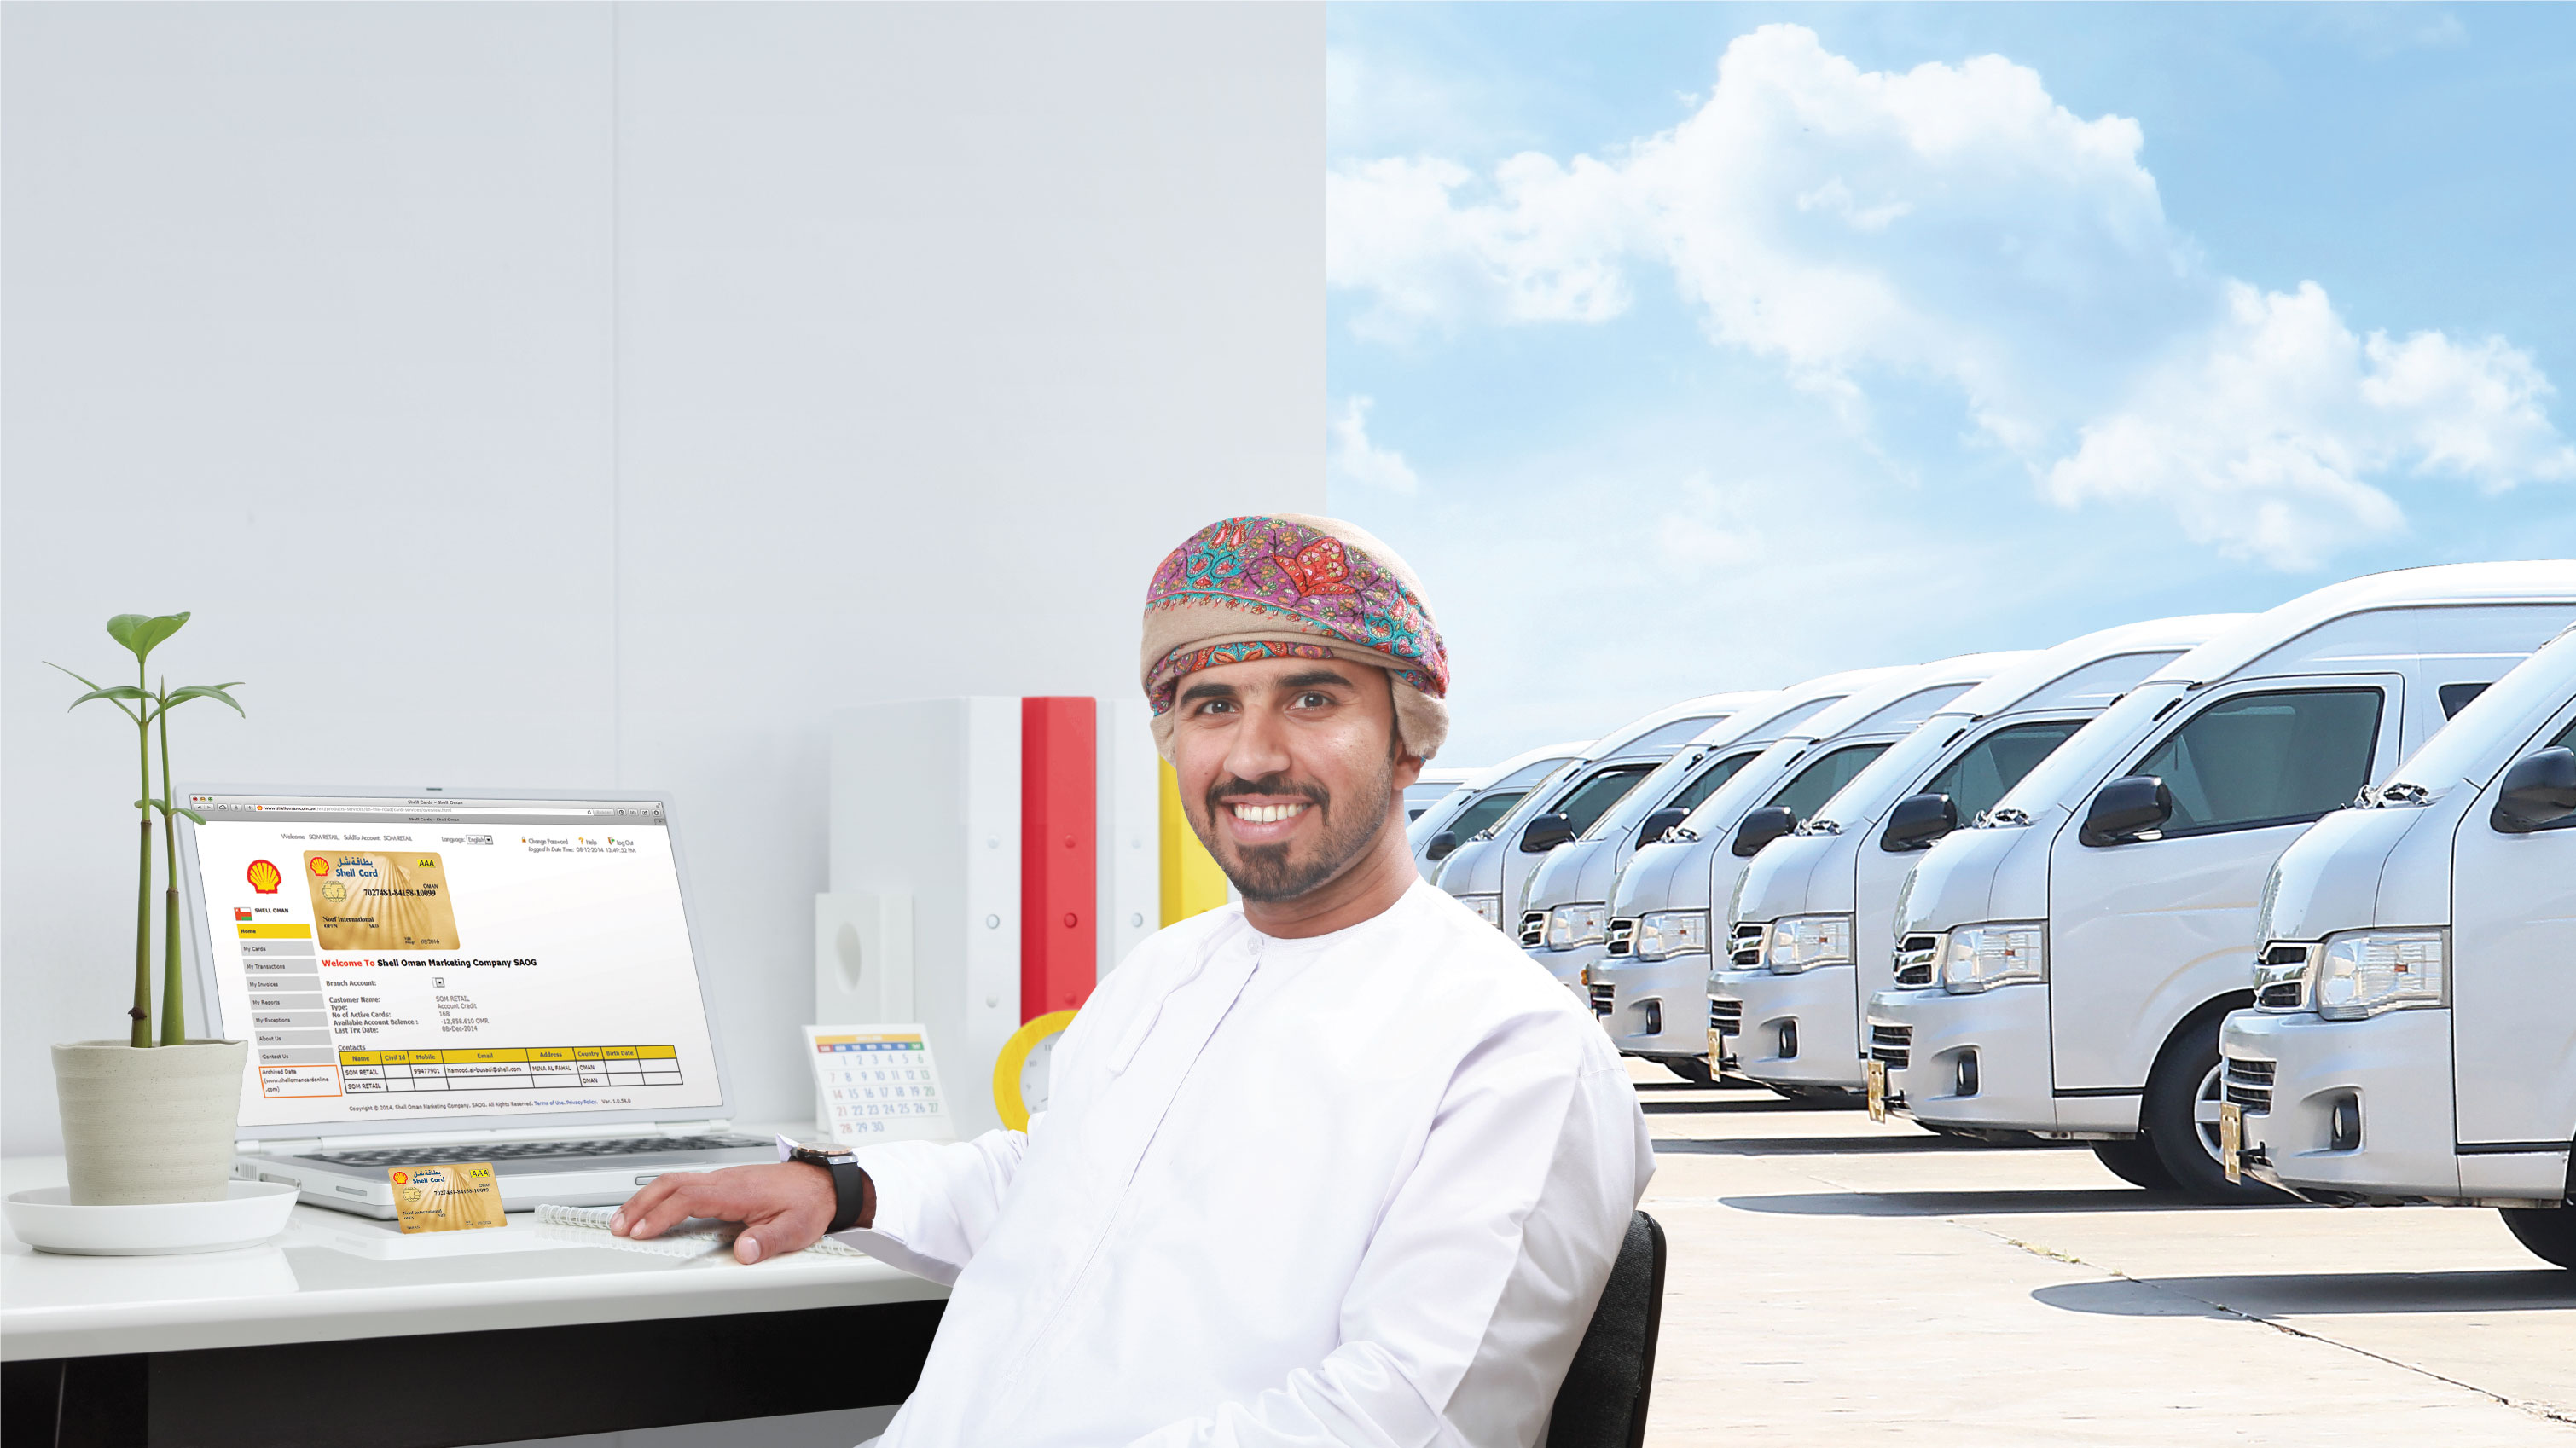 A complete online management solution for your fleet